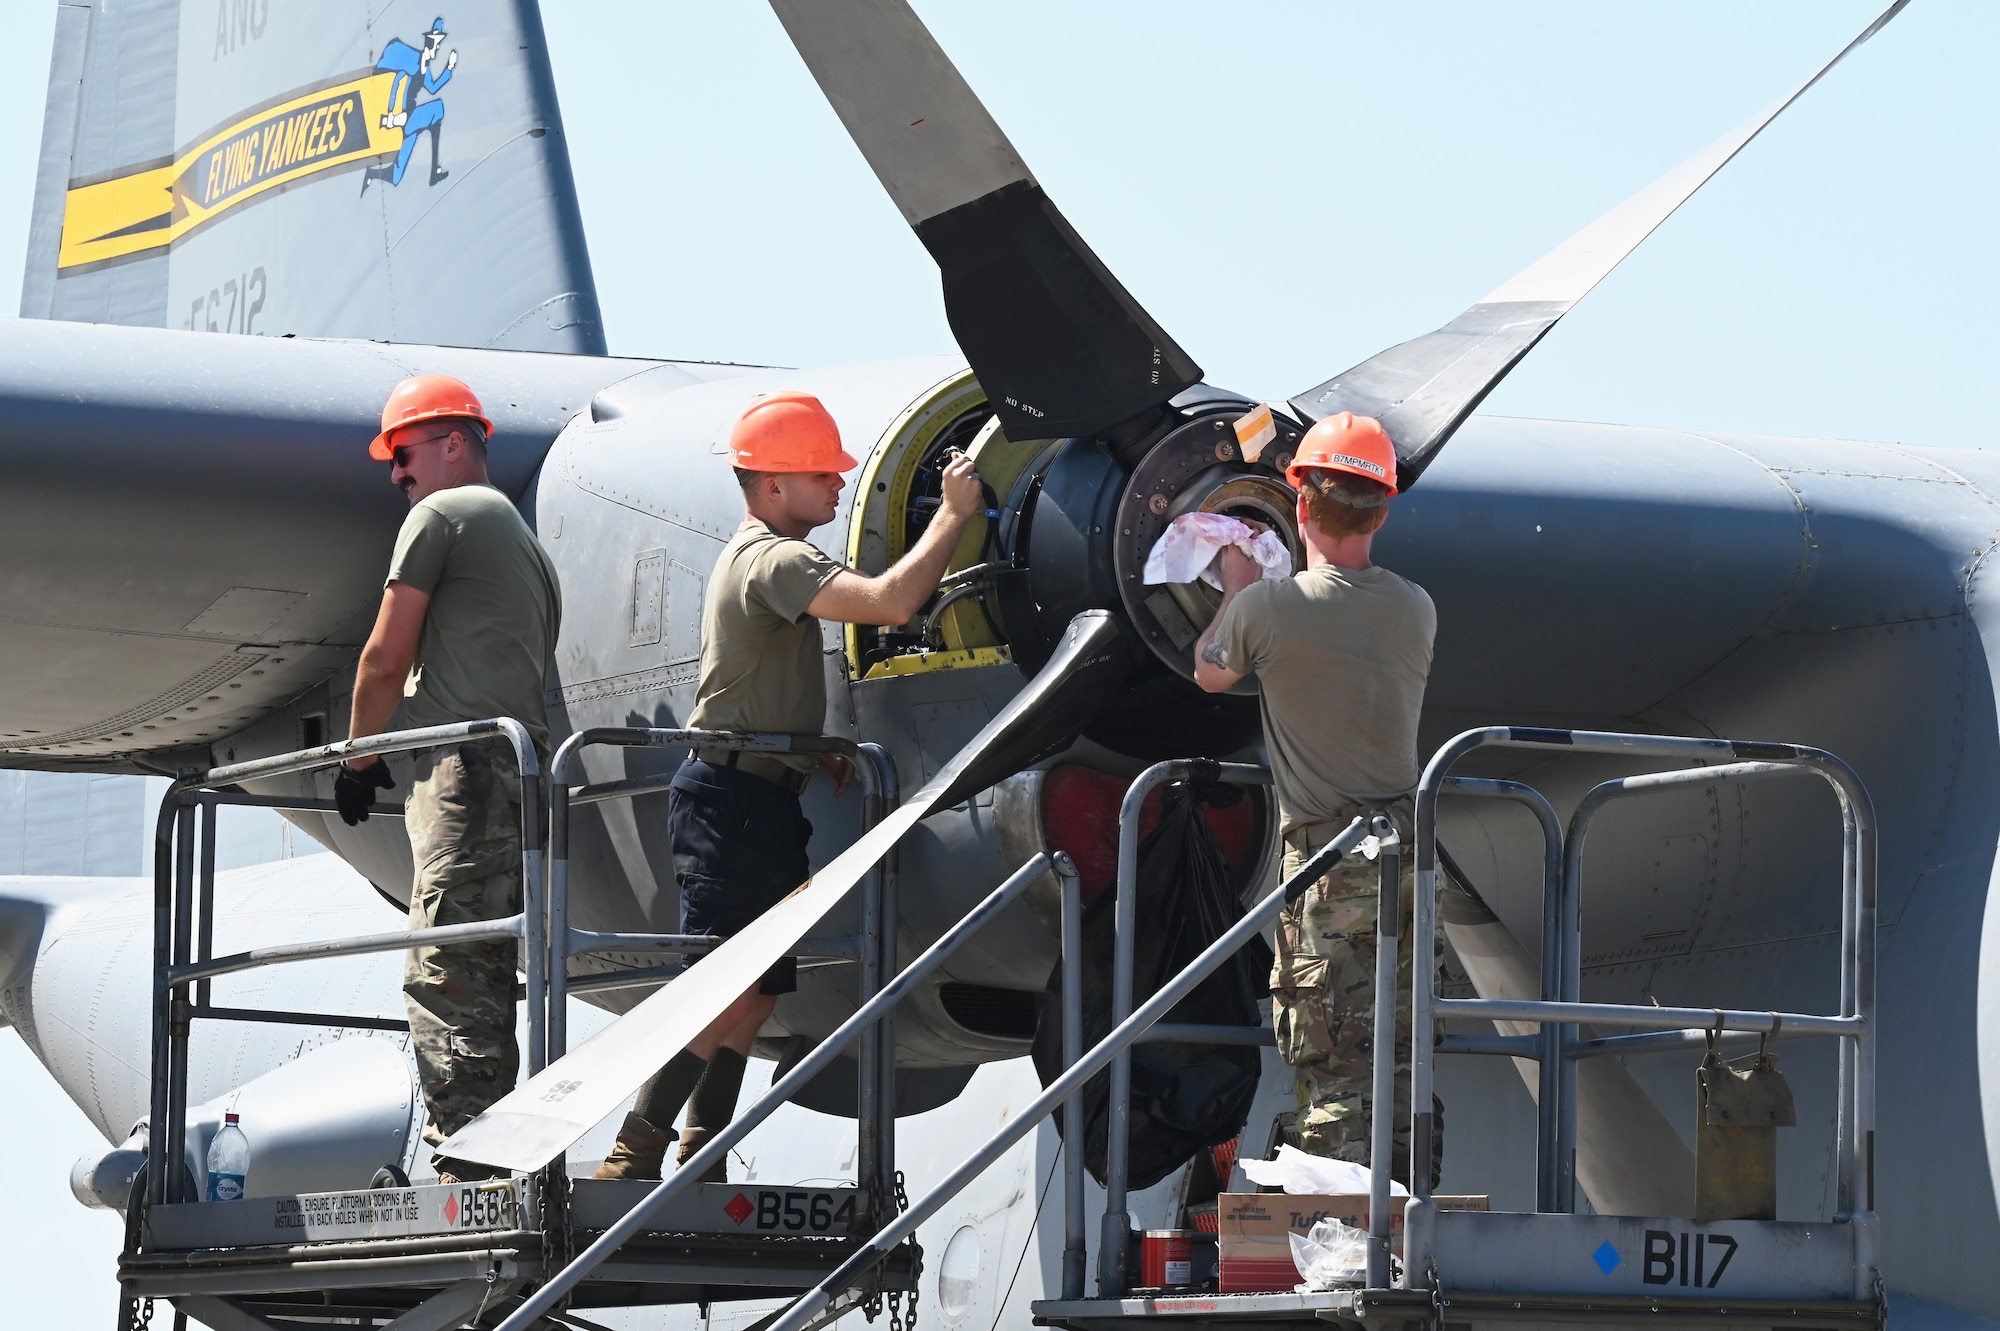 Tech. Sgt. Dan Doyle, Staff Sgt. Nicholas Zamsky, and Staff Sgt. Peter Chase, propulsion technicians with the 75th Expeditionary Airlift Squadron, work on attaching the first of four replacement props for a C-130H at Camp Lemonnier, Djibouti, October 20, 2022. Replacing these props allows the squadron to continue its mission in providing reliable intra-theater airlift operations across a 12-country area of responsibility. (U.S. Air Force photo by Tech. Sgt. Jayson Burns)